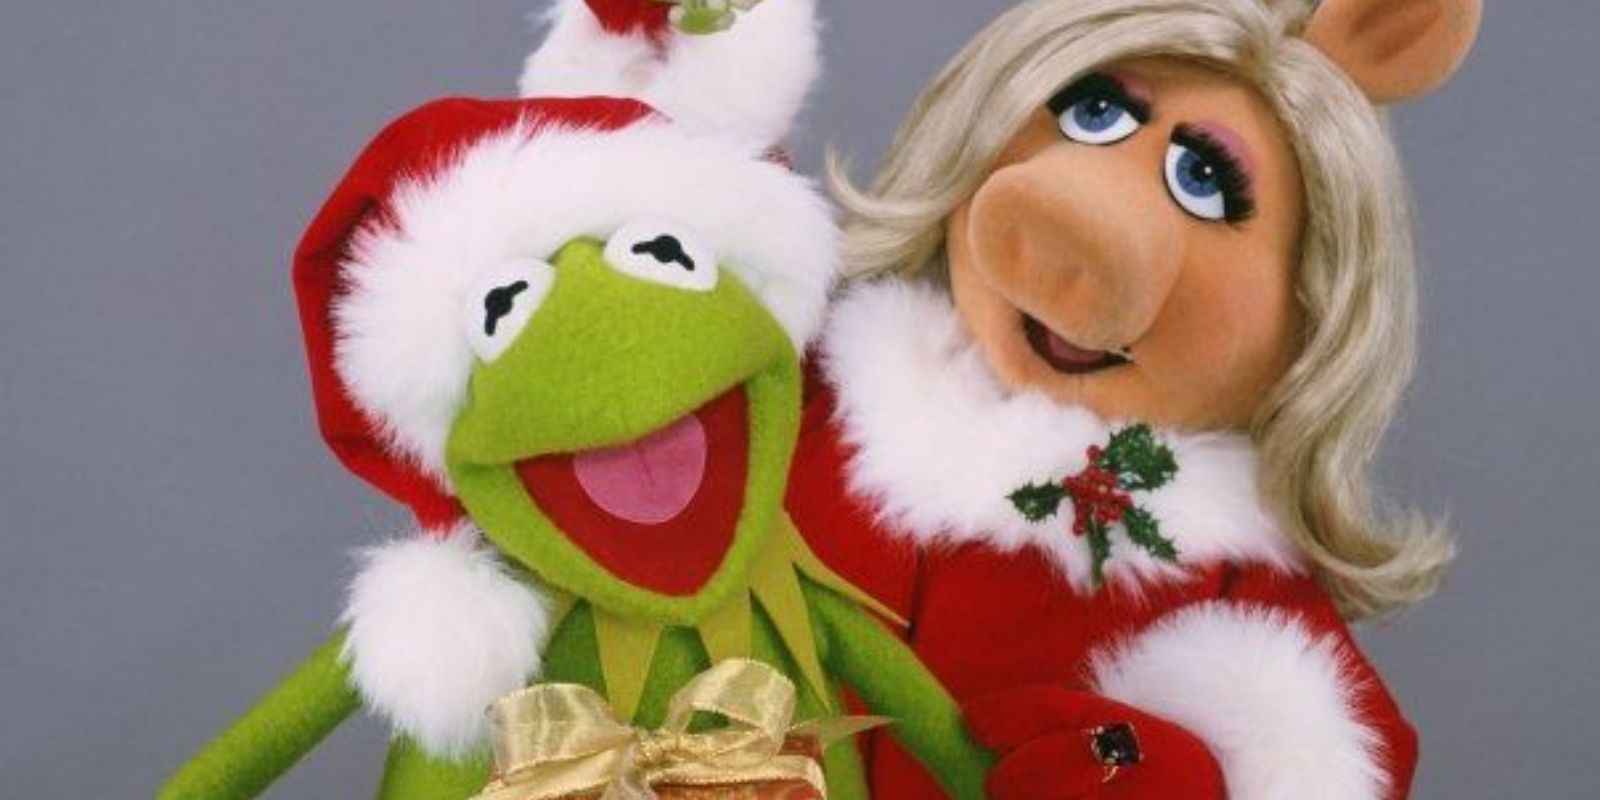 Christmas Kermit the Frog and Miss Piggy The Muppets